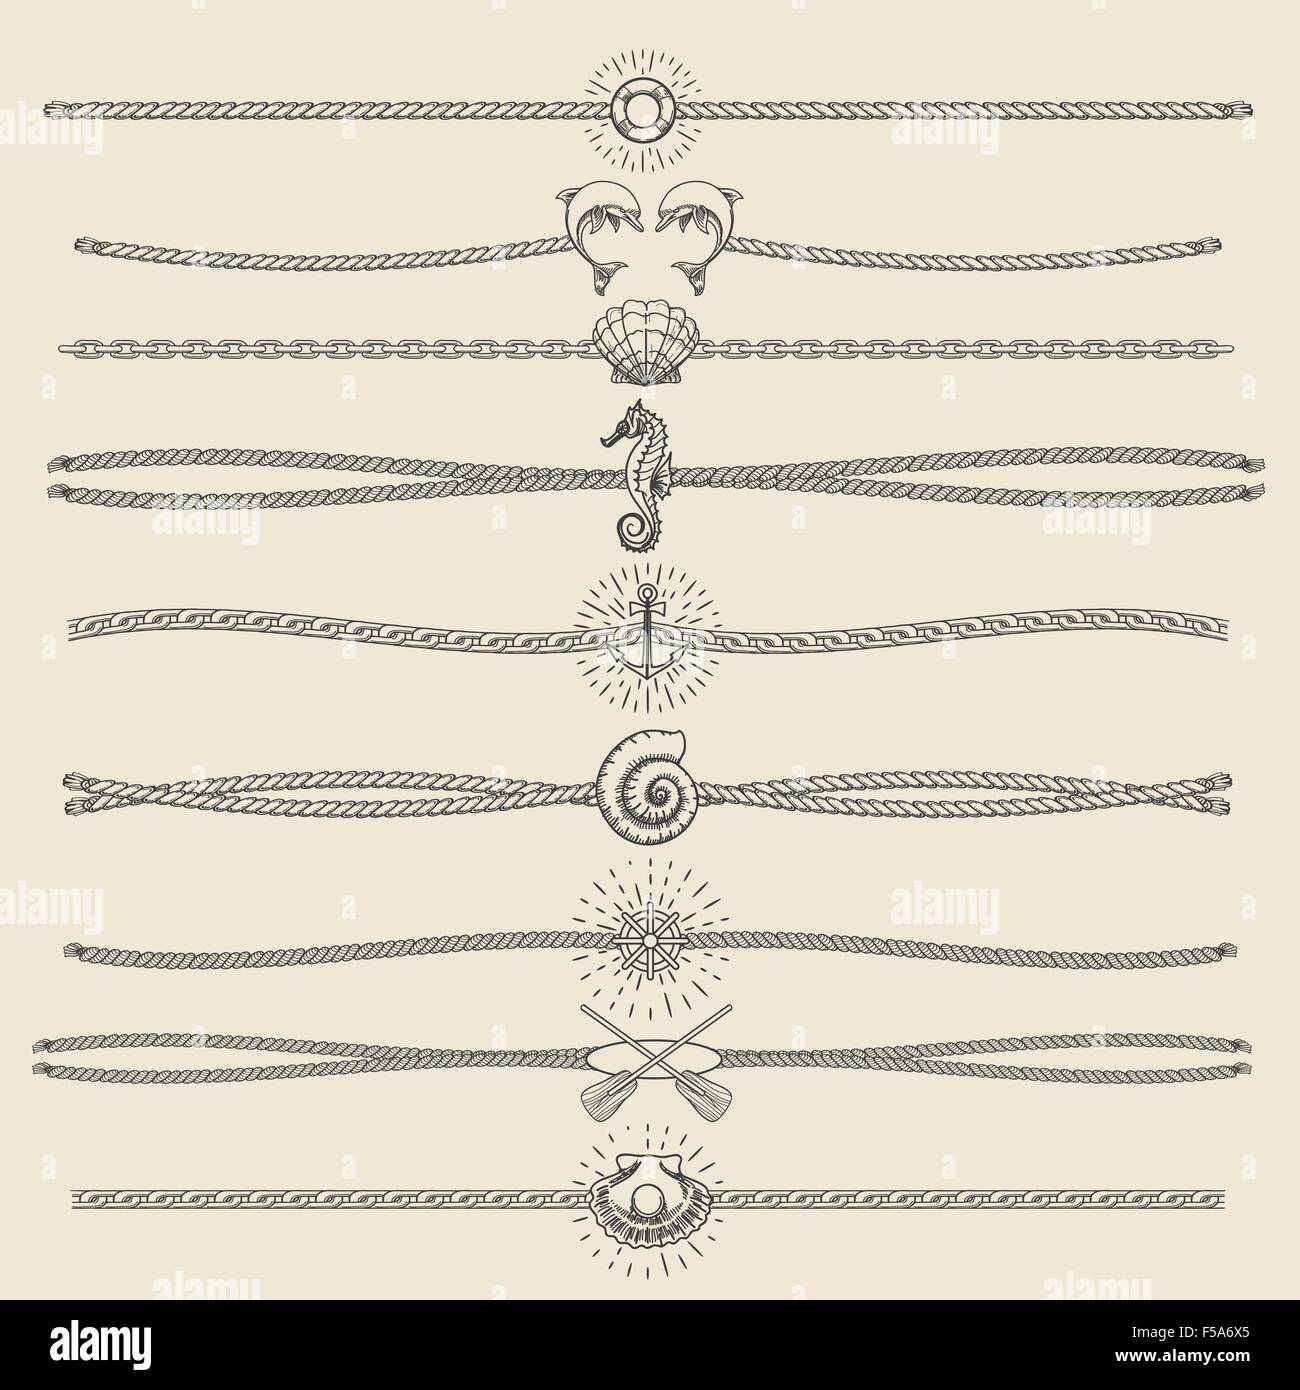 Set of nautical ropes and chains decor elements in hipster style. Hand drawn dividers and borders with dolphins etc Stock Vector